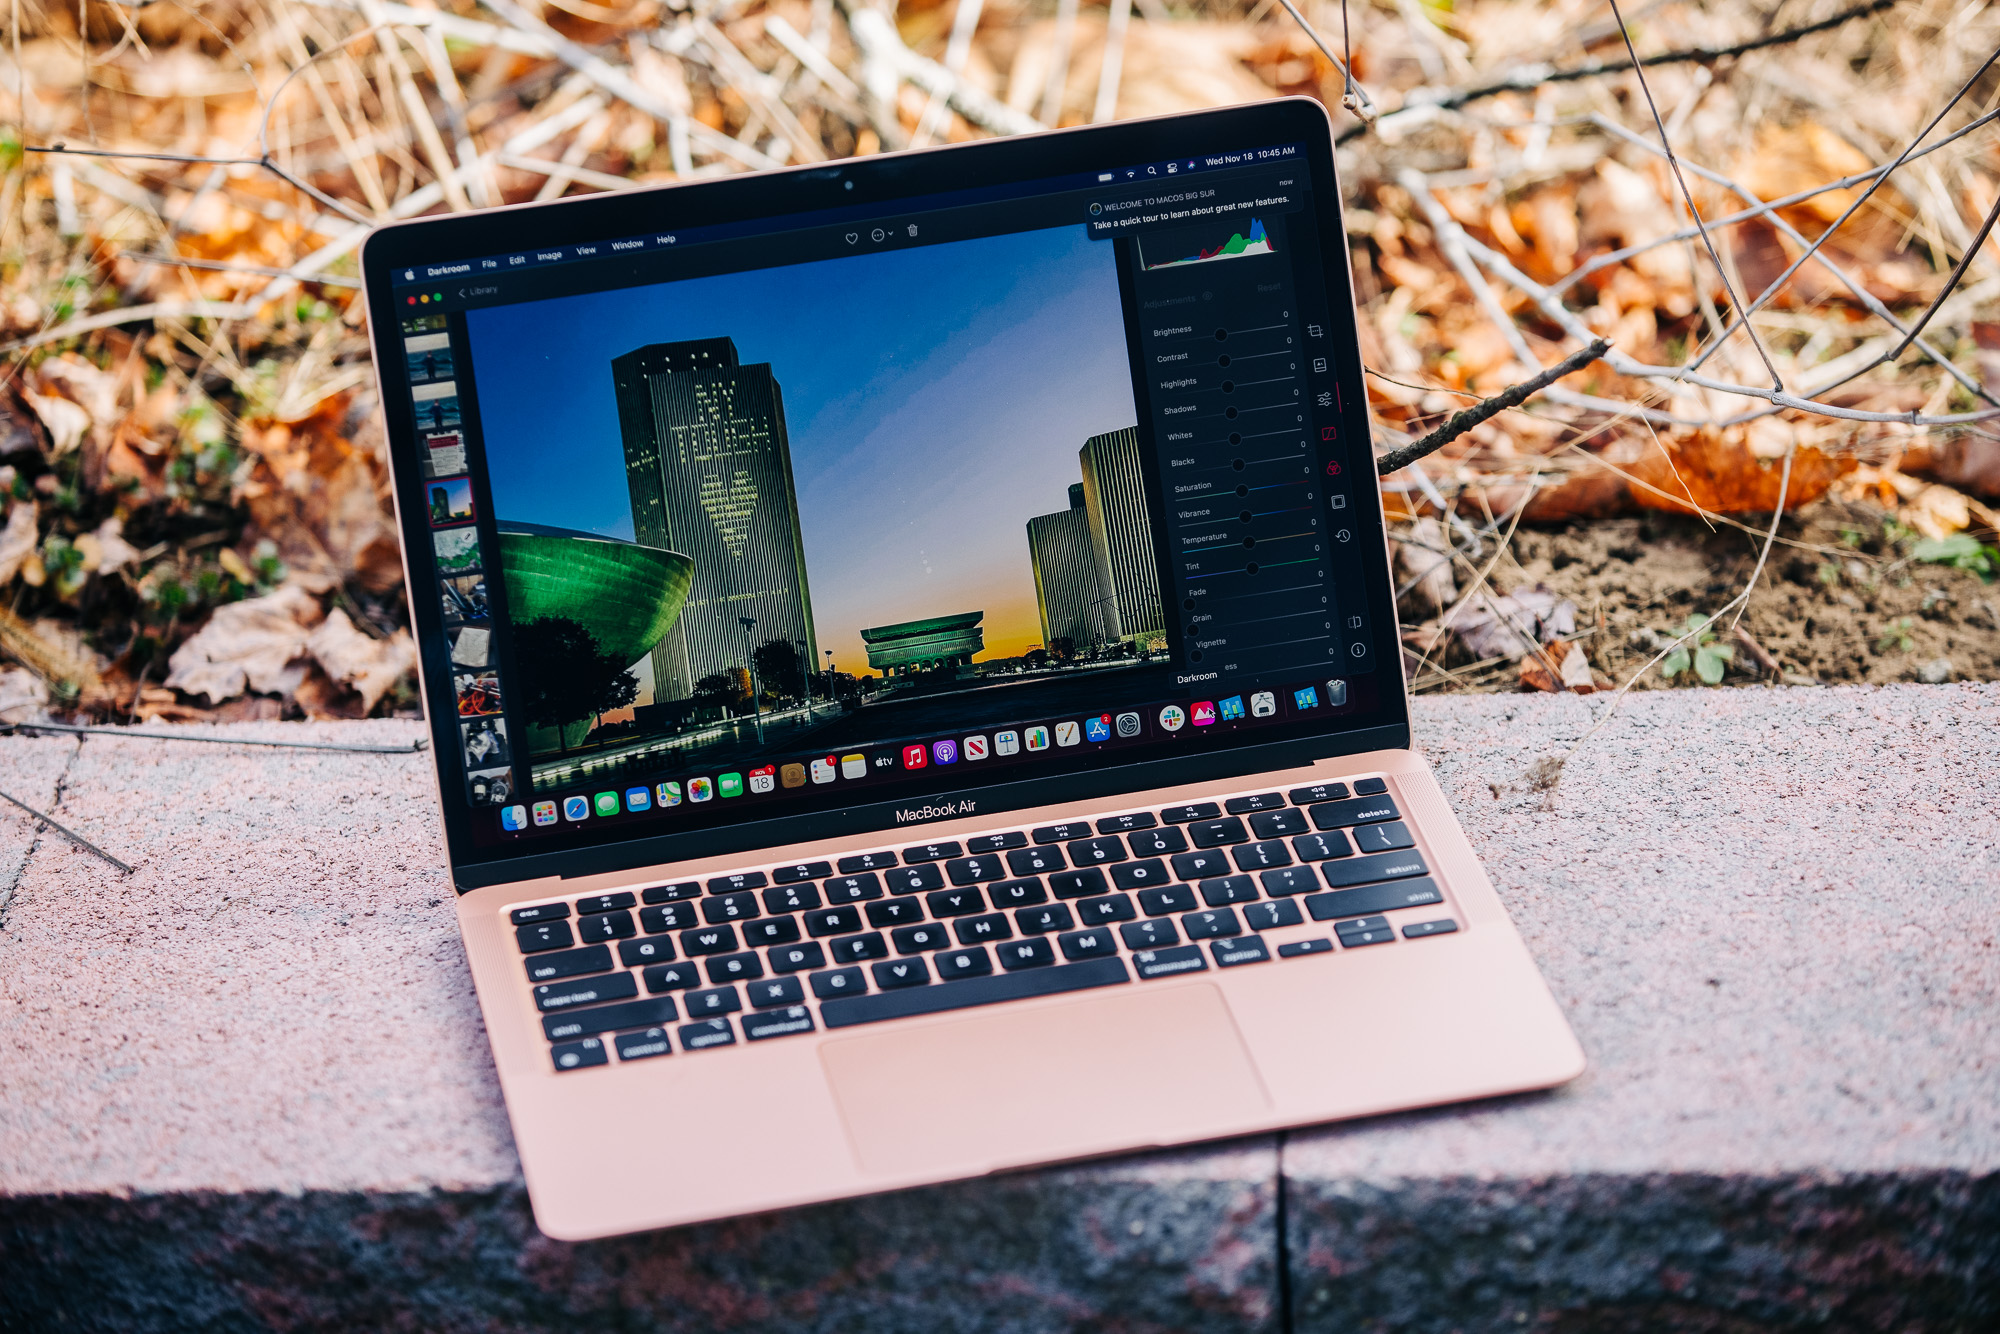 Review: Is the Macbook M1 Pro the best laptop for photographers in